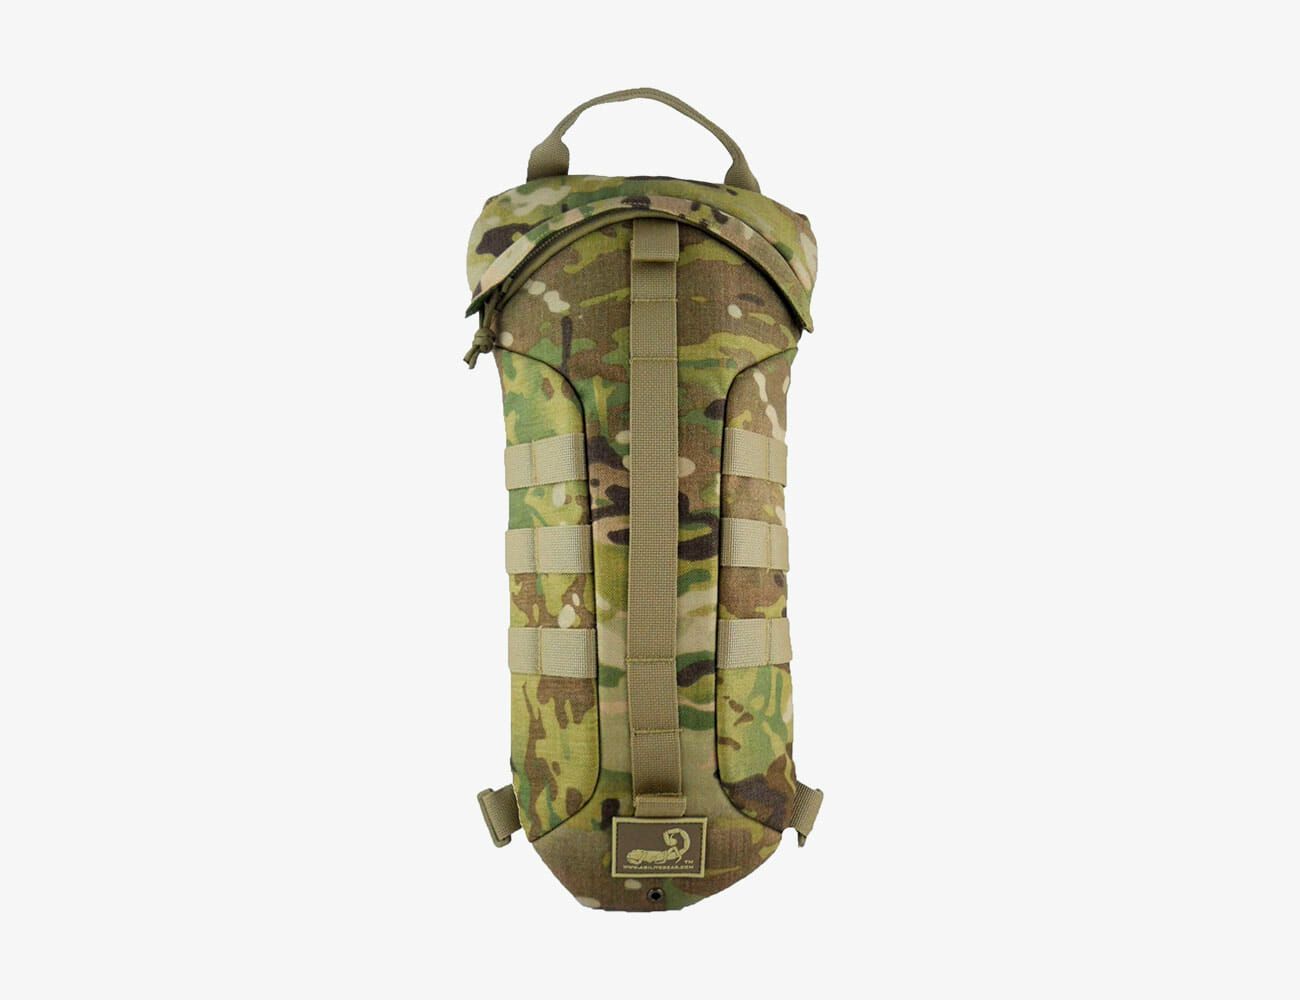 Tactical Hydration Pack Bag Backpack Outdoor Riding Hiking Camping For JPC Vest 